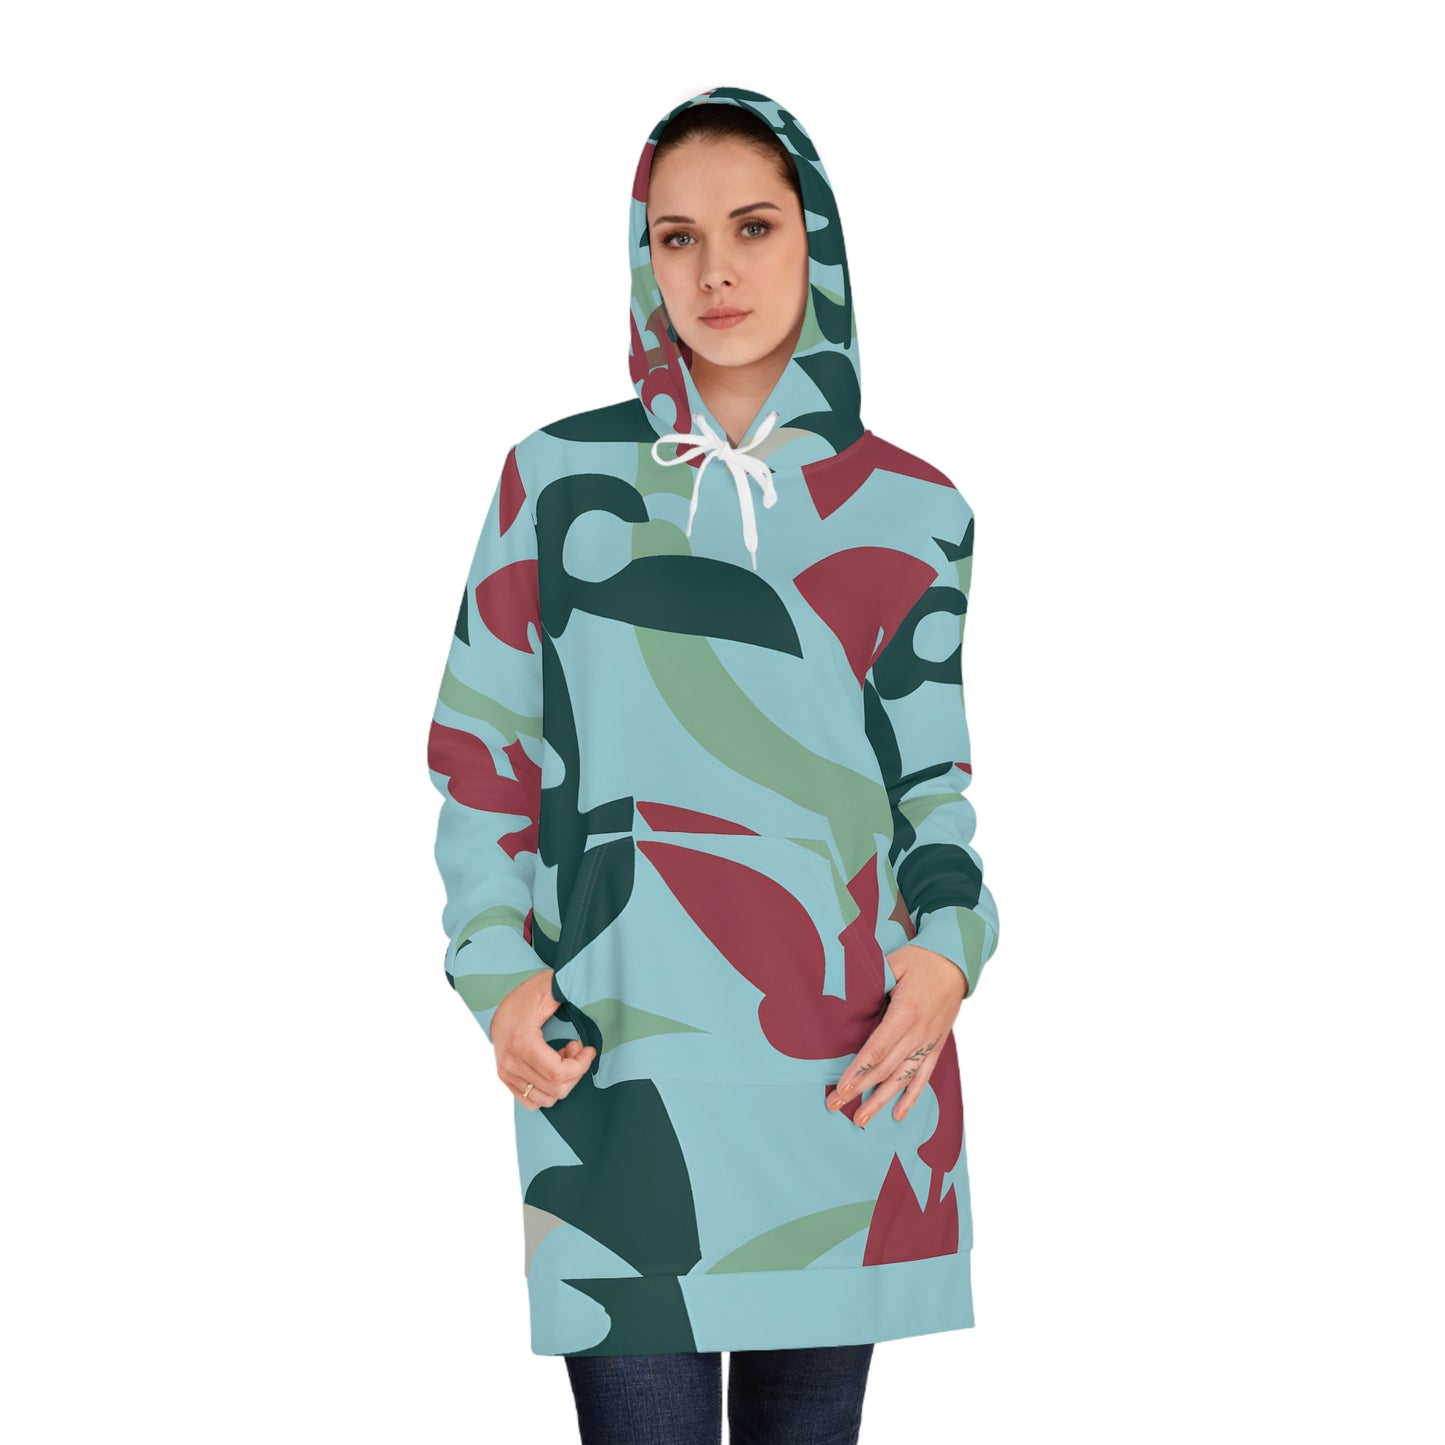 Chaparral Ione - Women's Hoodie Dress